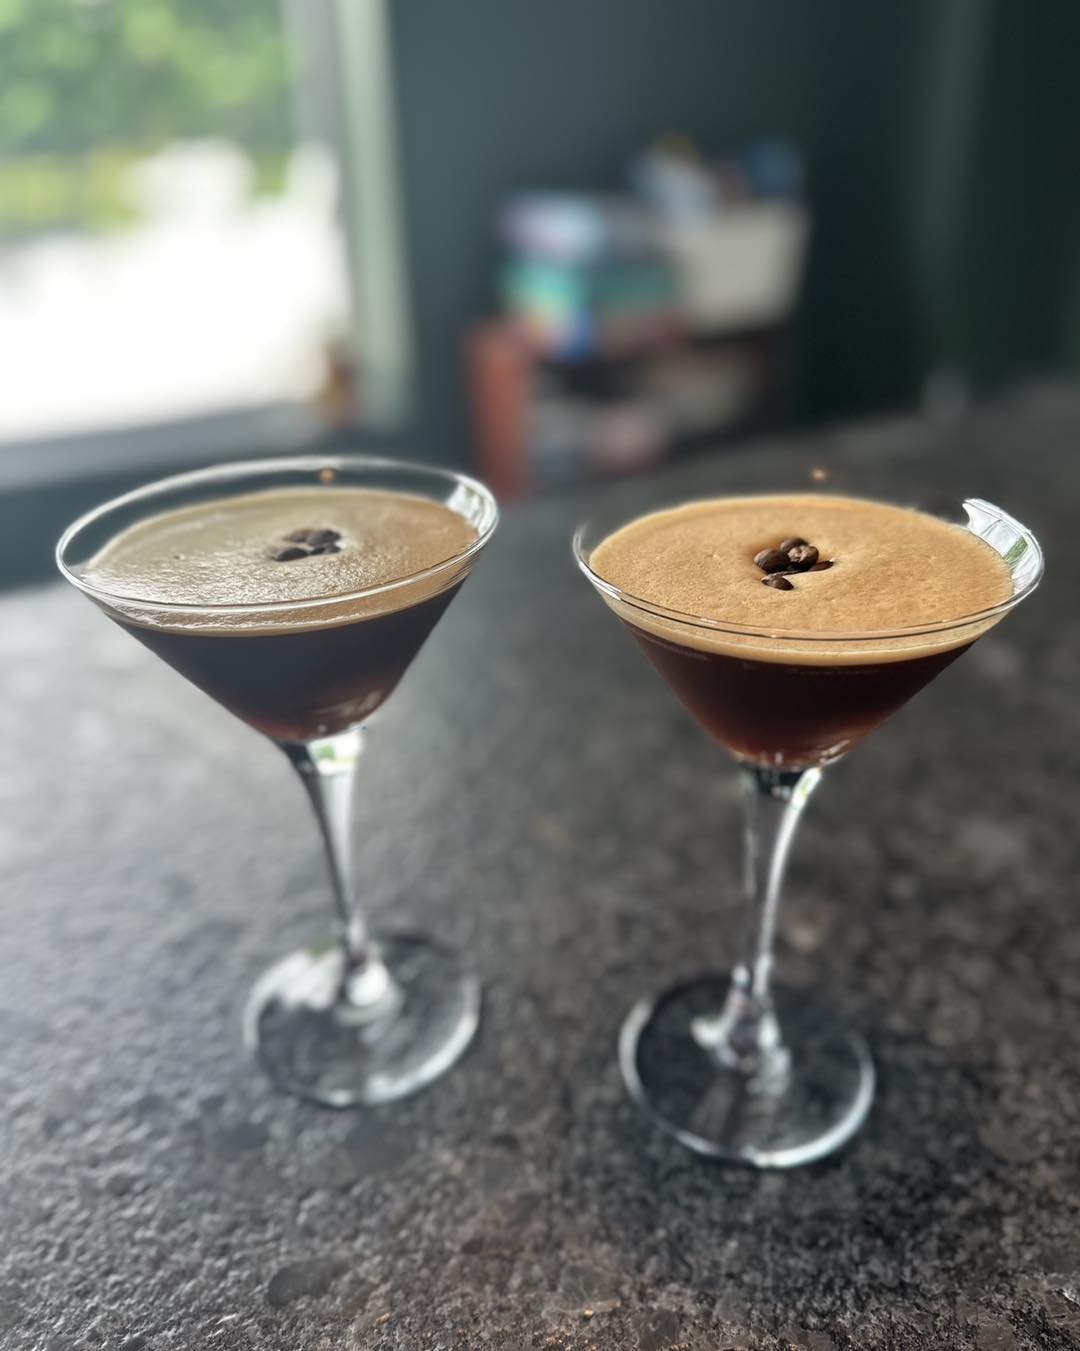 Espresso martinis are my best friend and they can be yours too! Come check out both our cocktail and mocktail versions today until 9! ☕️🍸
&bull;
&bull;
&bull;
#cafe #cocktail #mocktail #ohio #smallbusiness #coffeeshop #sanduskyohio #book #sandusky #